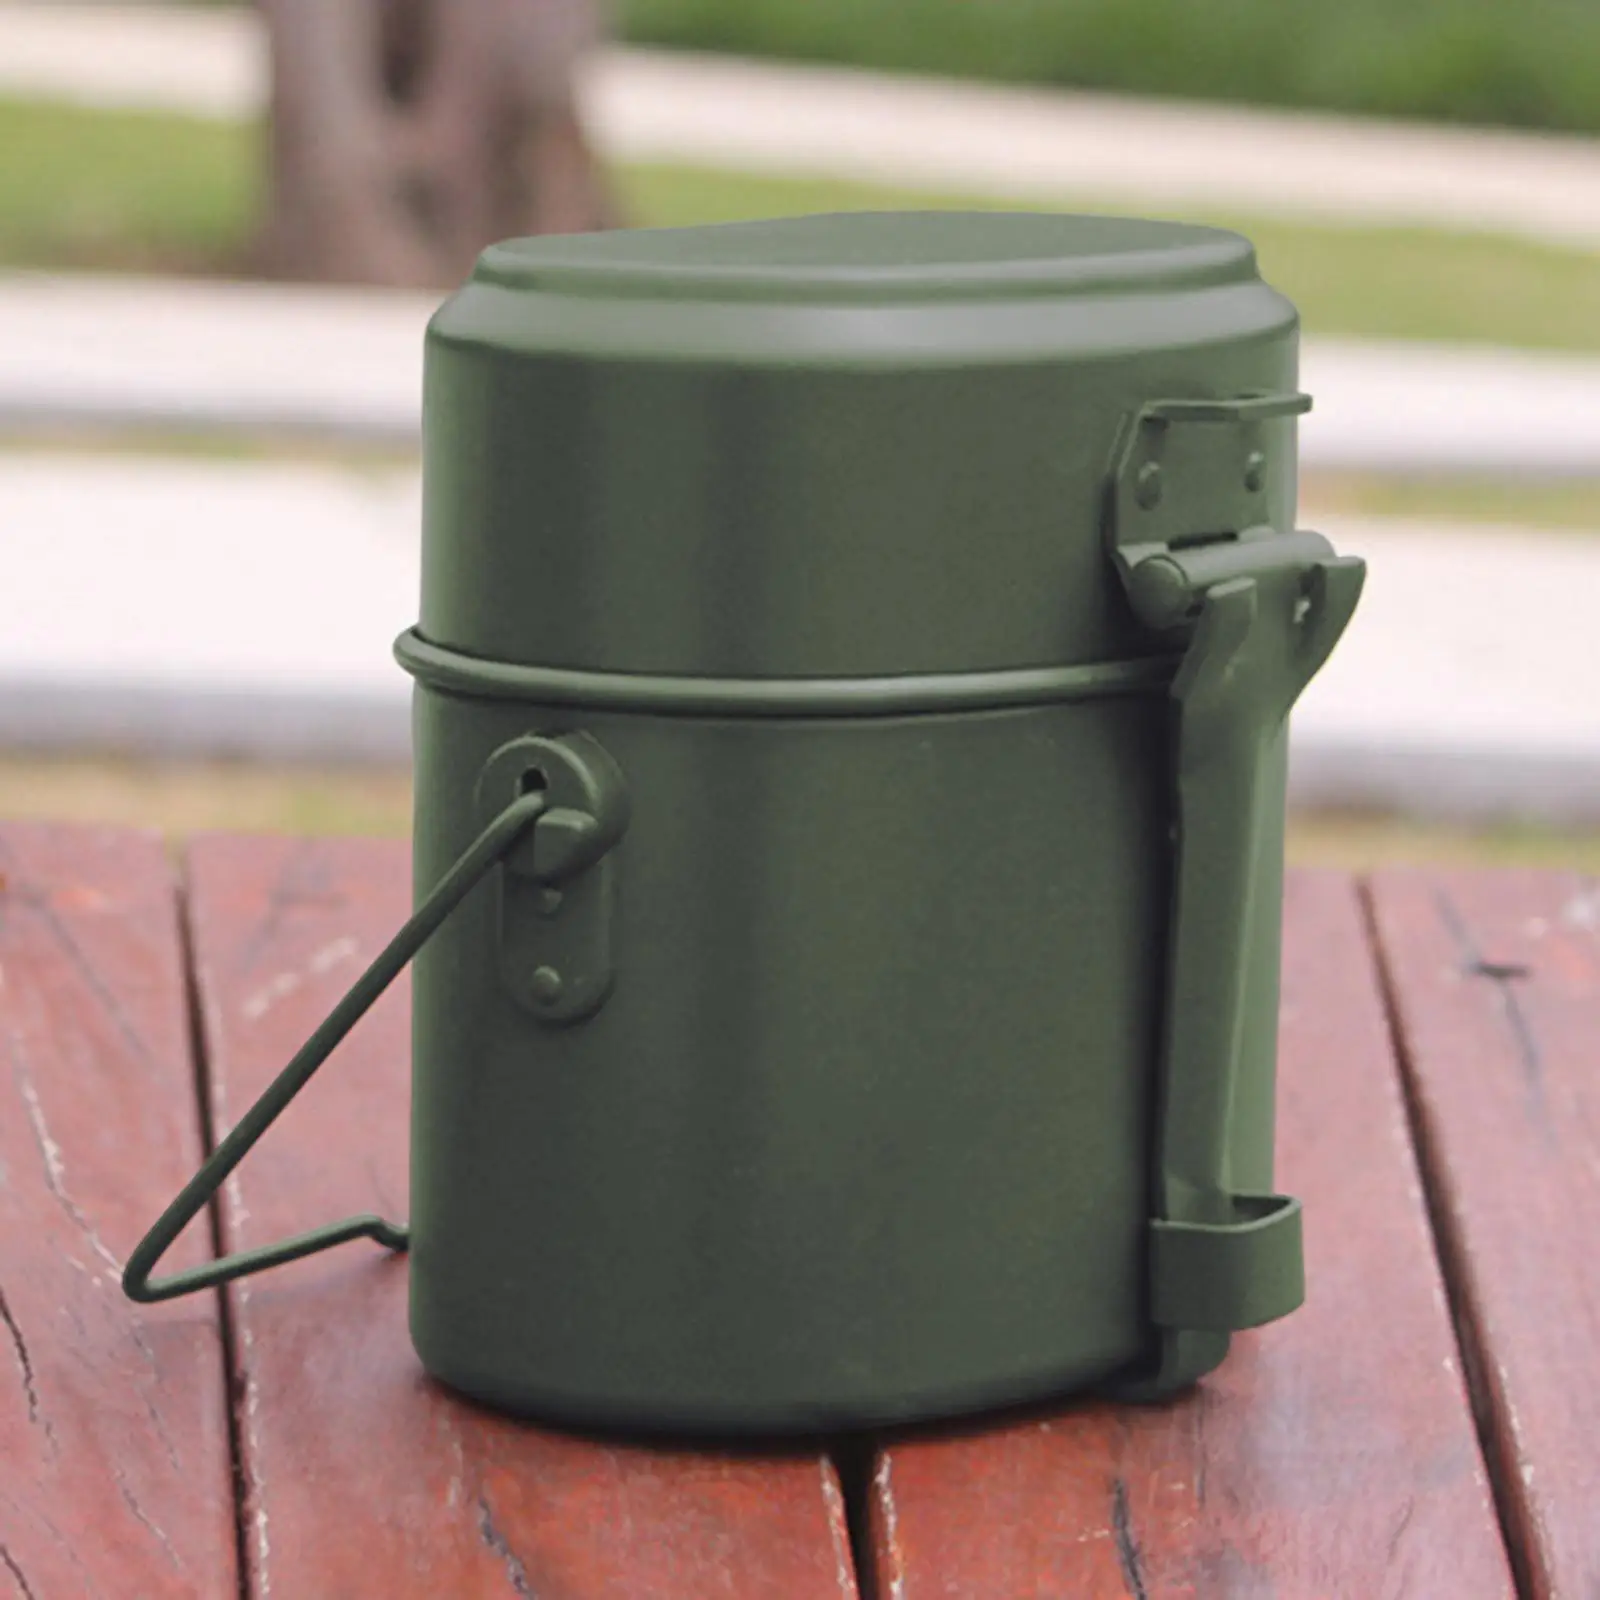 3Pcs Lunch Box Aluminum Alloy Cookware for Camping Outdoor Food Container